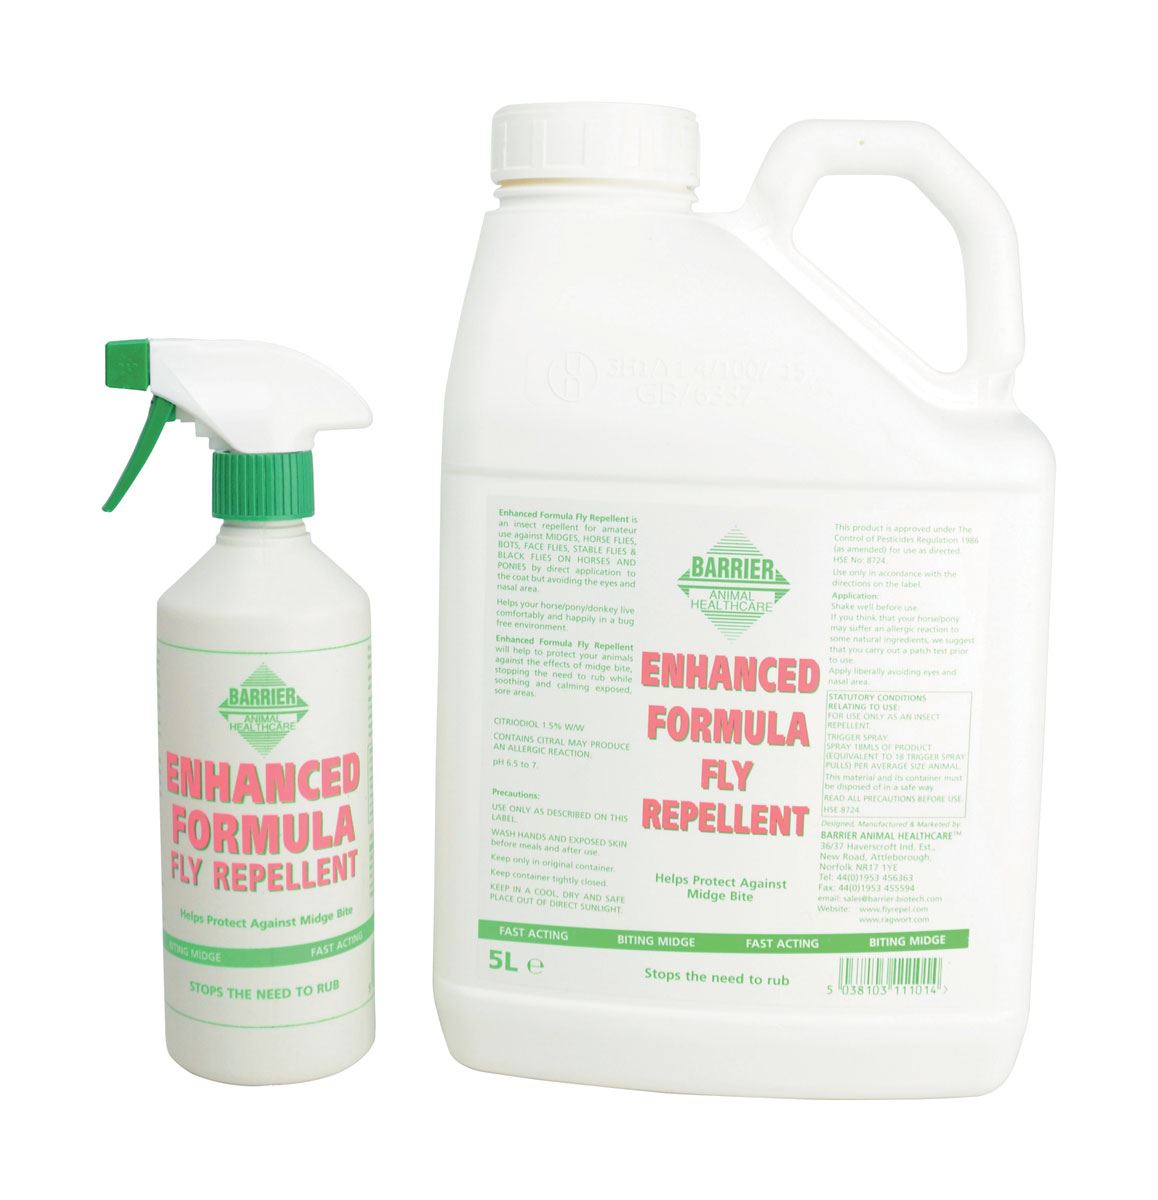 Barrier Enhanced Formula Fly Repellent - Just Horse Riders